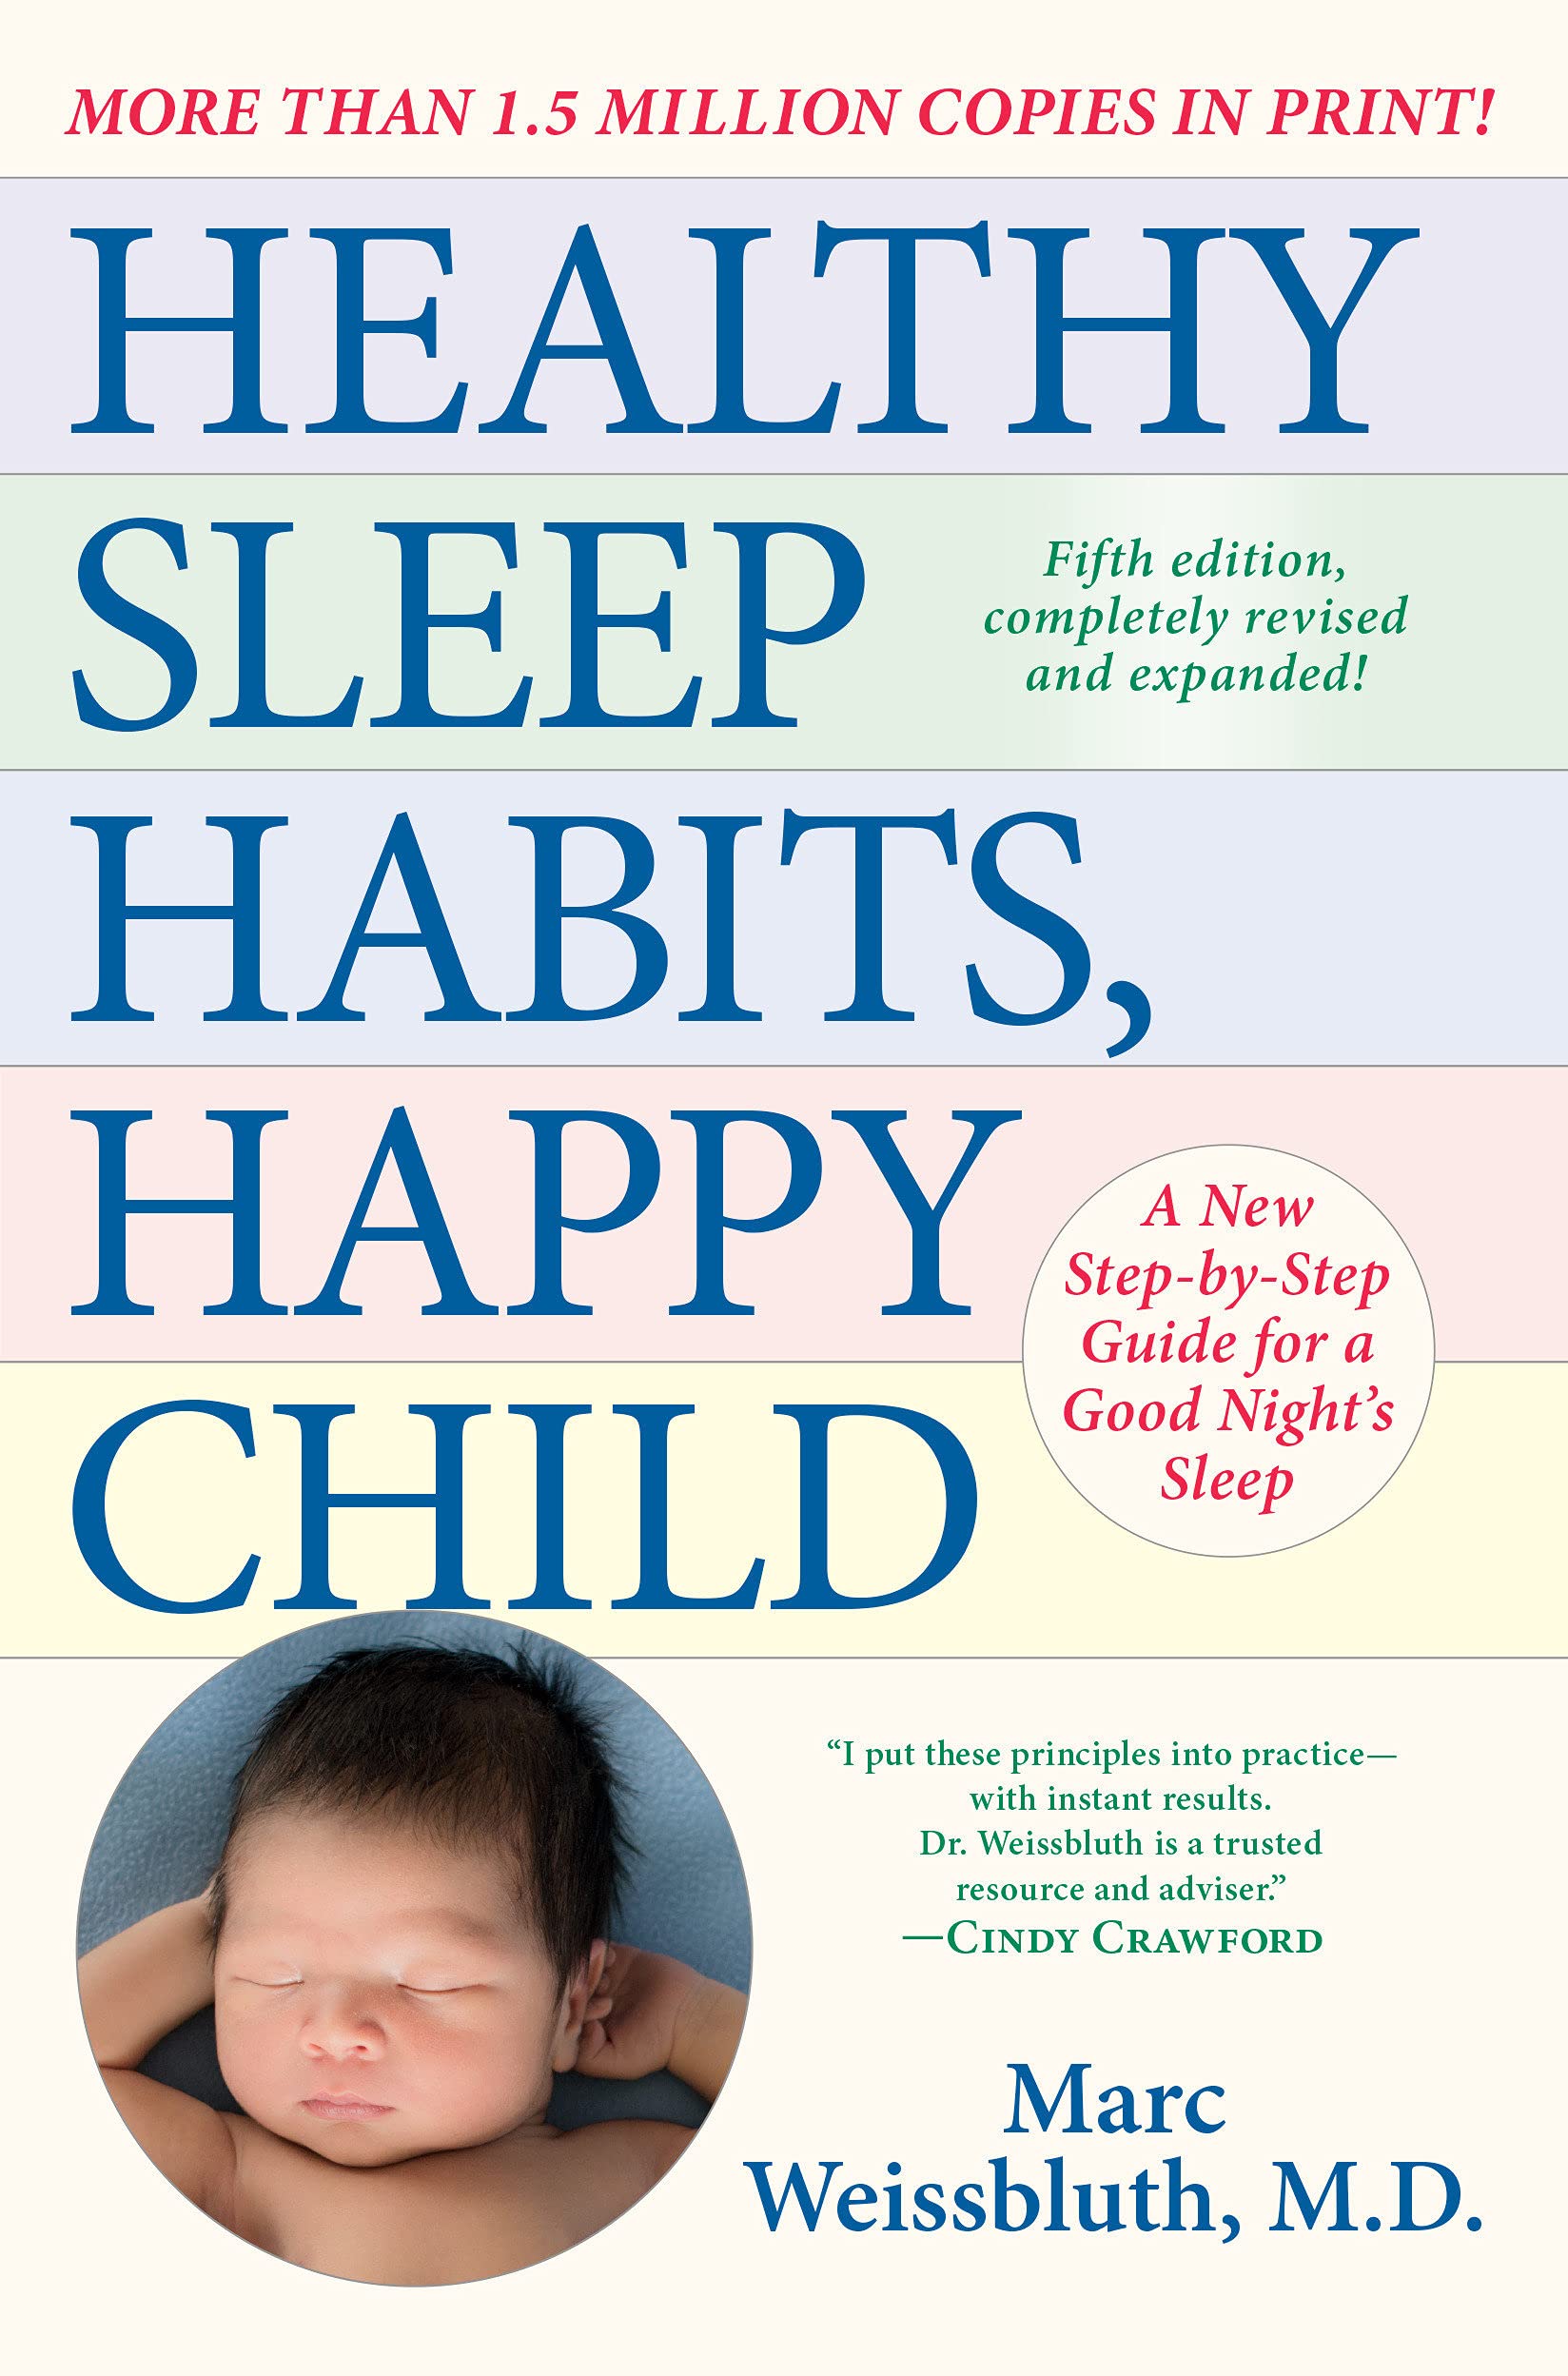 "Healthy Sleep Habits, Happy Child" by Marc Weissbluth, M.D.